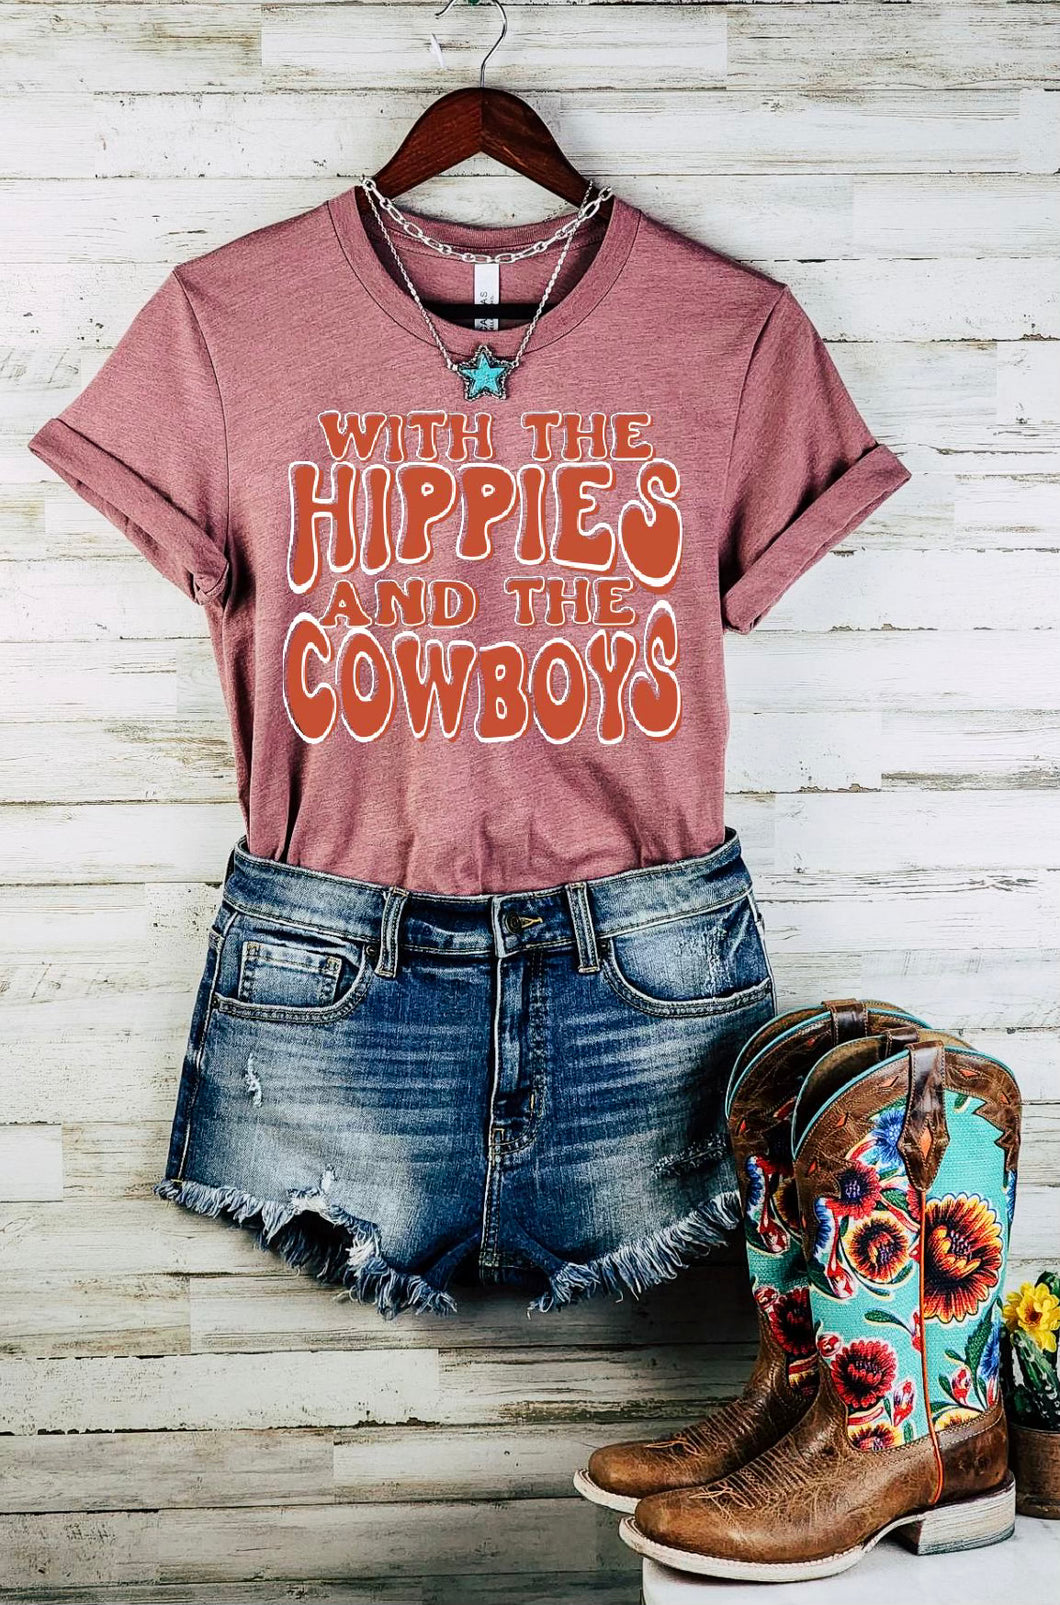 With the hippies and the cowboys women’s graphic tee - Mavictoria Designs Hot Press Express